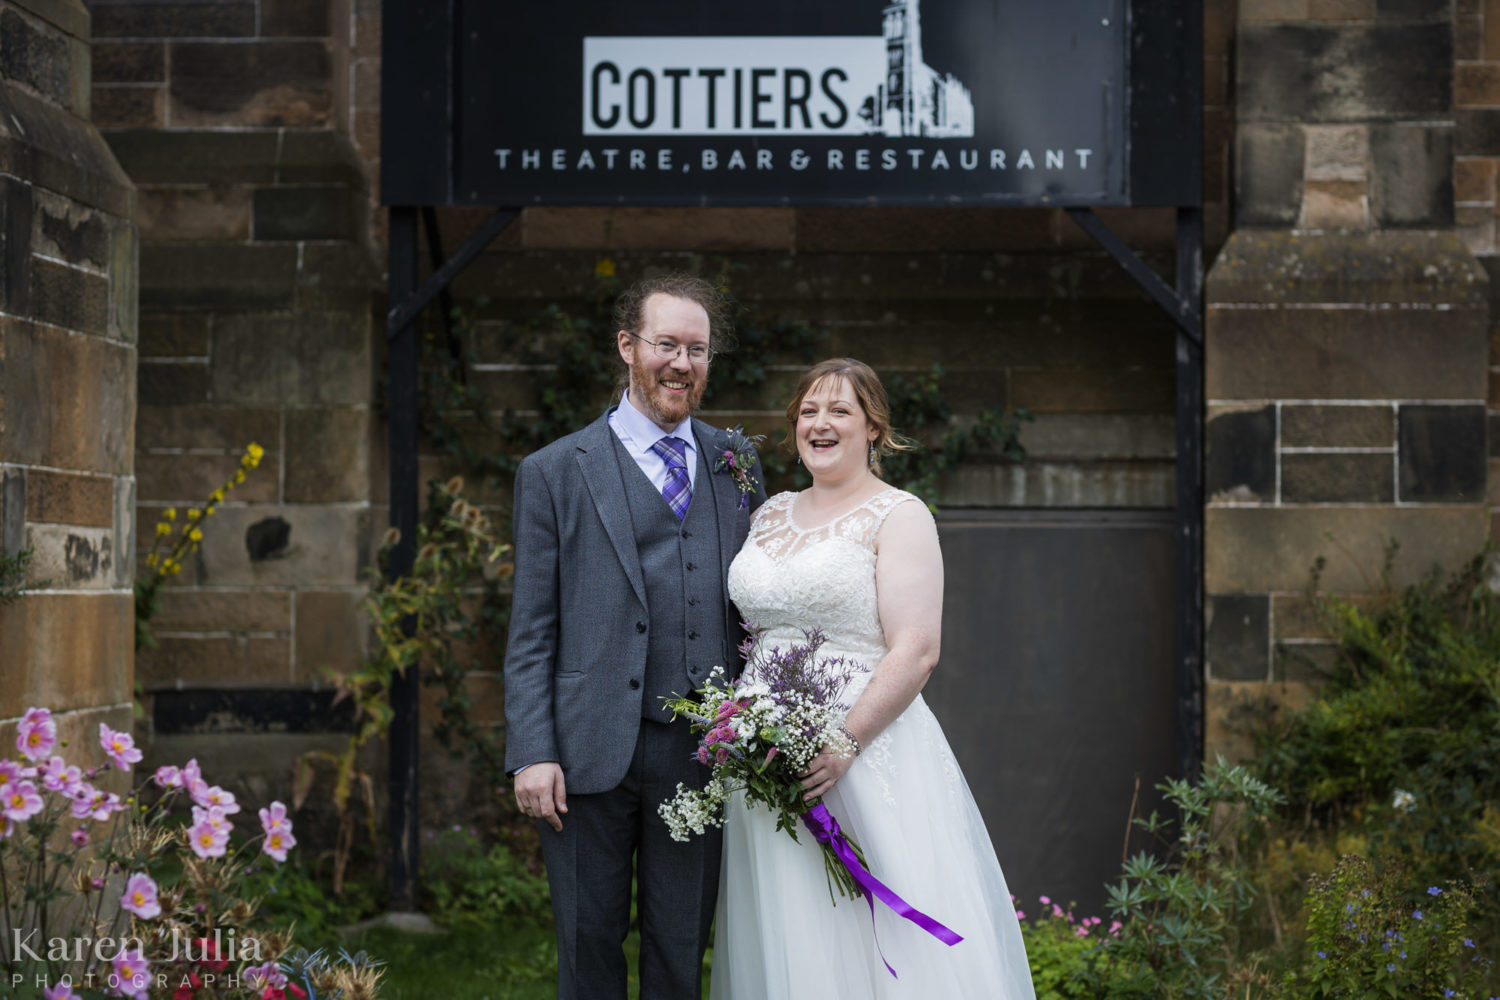 bride and groom portrait on their wedding day in front of the Cottiers sign